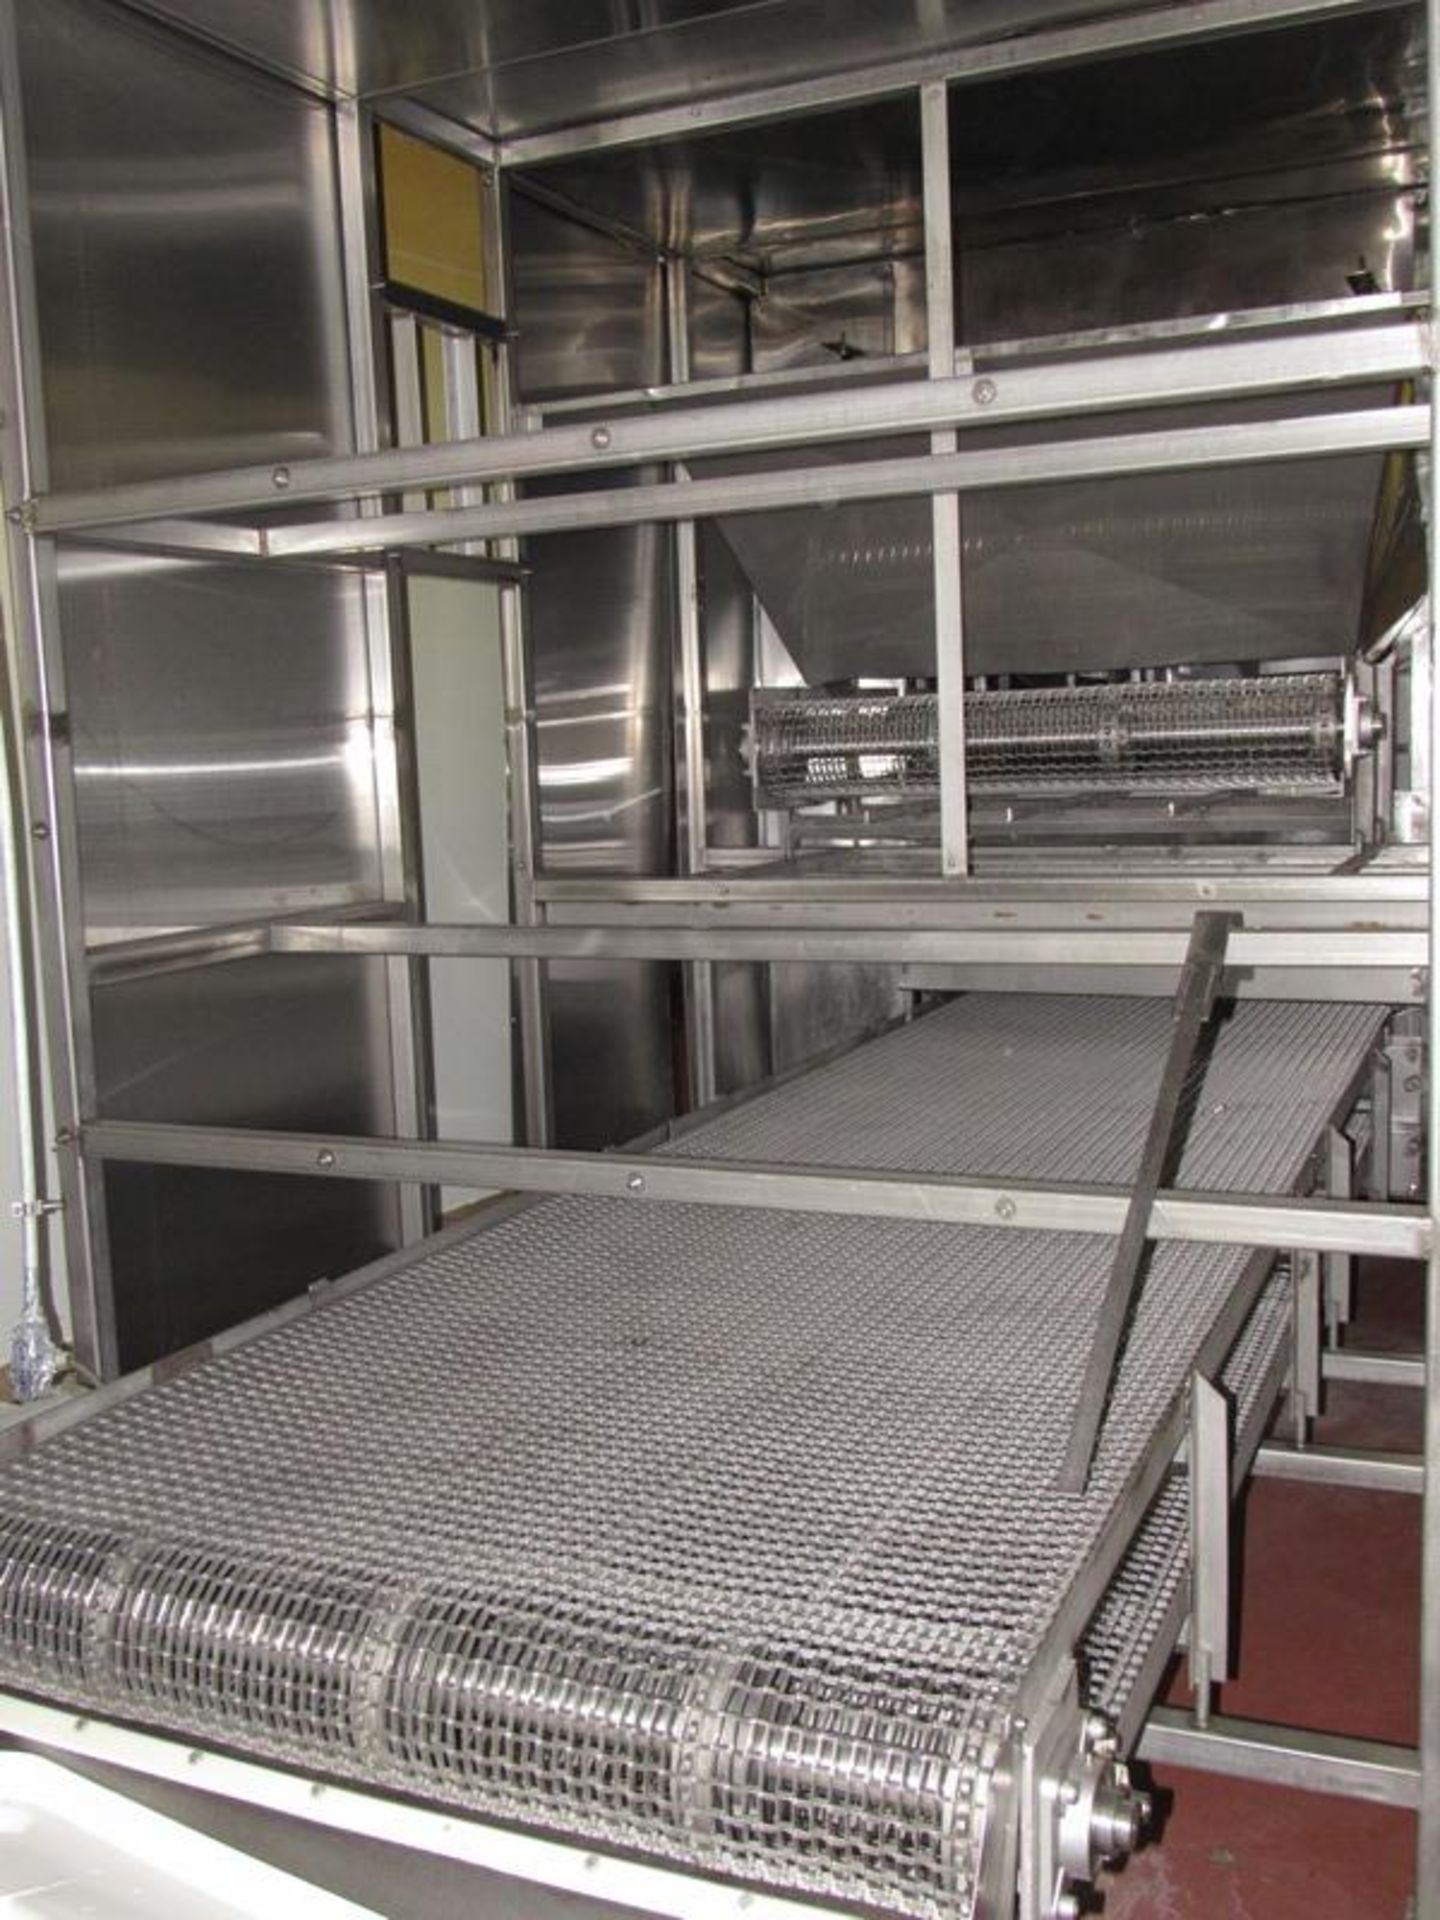 Stainless Steel Continuous Oven, triple pass oven, 40” wide belt X approximately 70’ long tunnel - Image 6 of 16